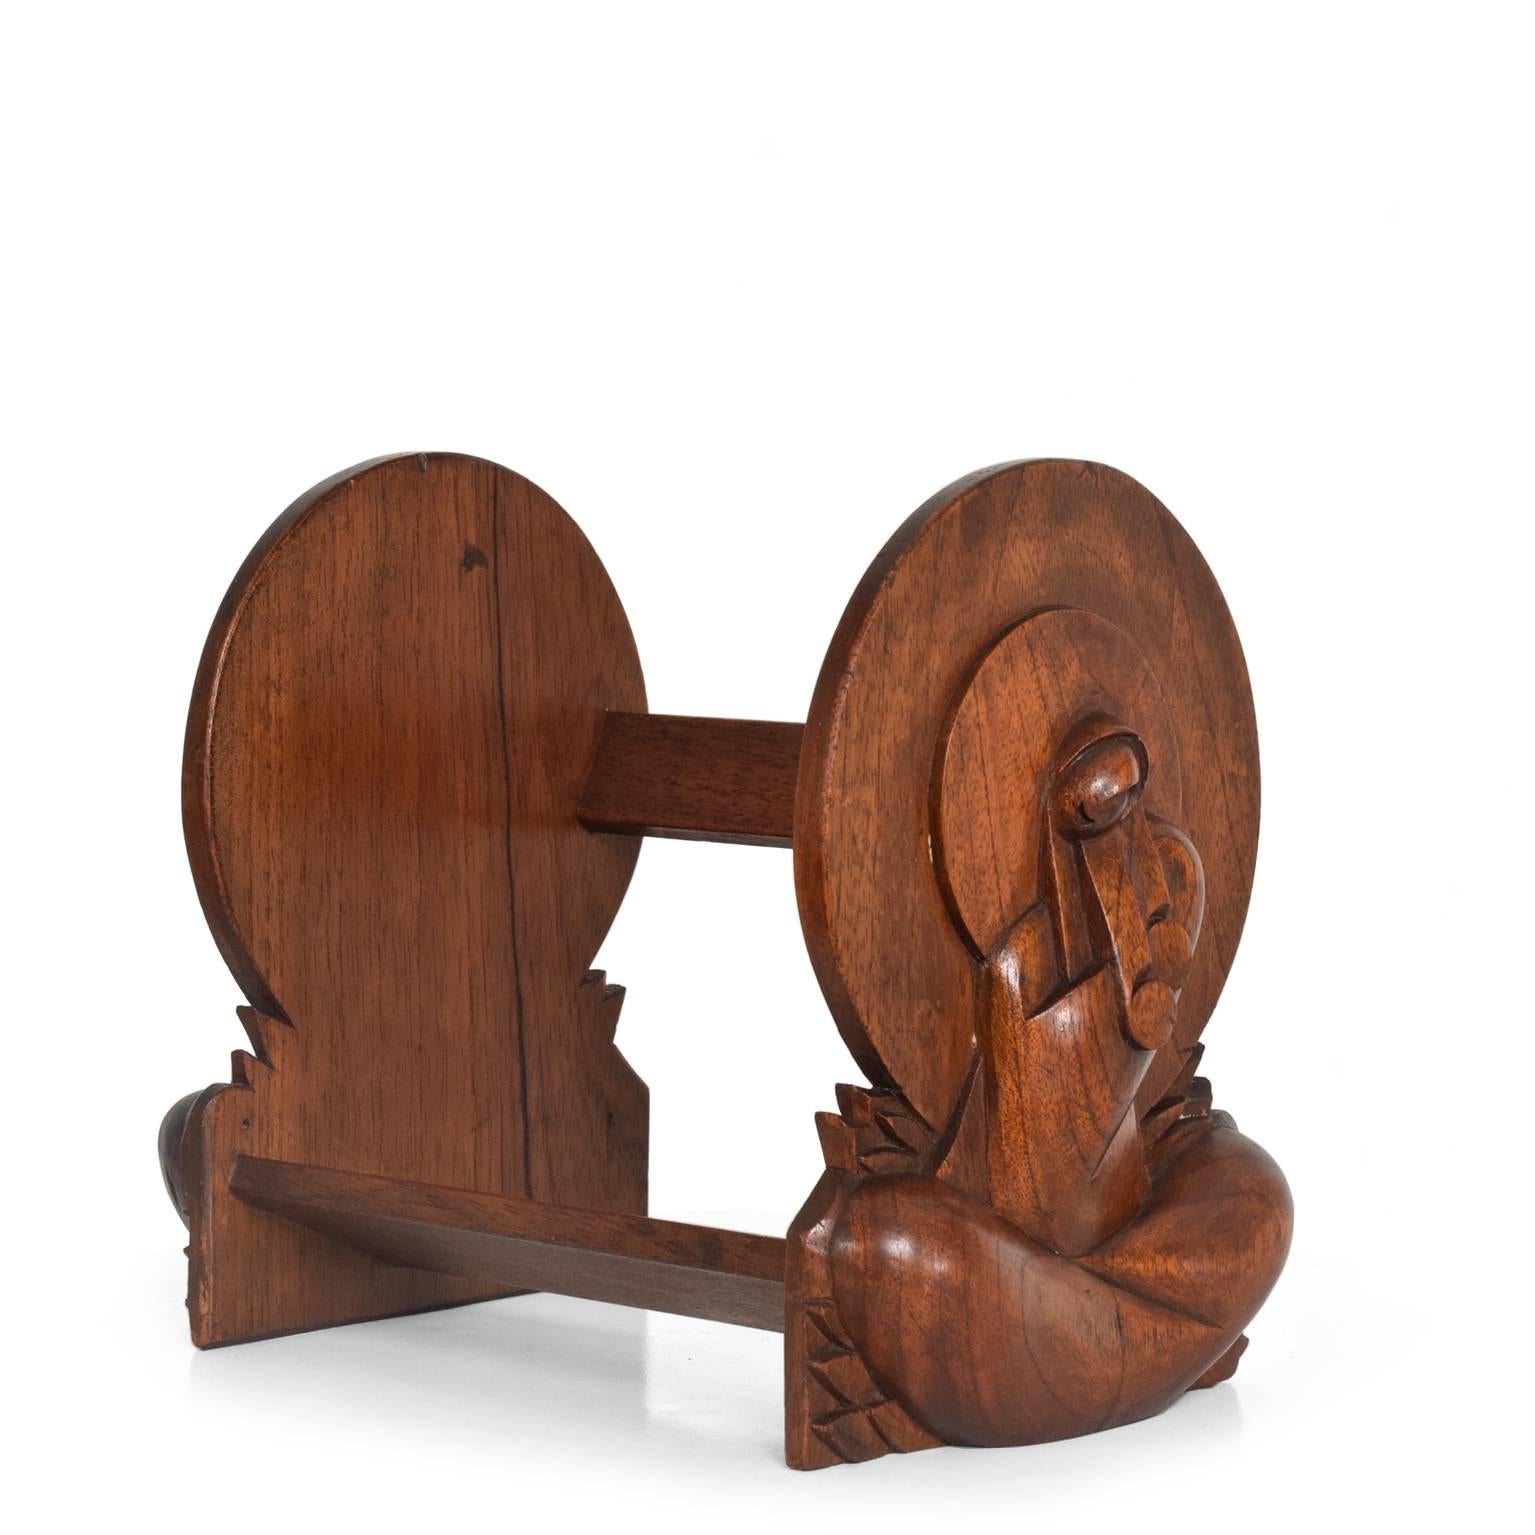 For your consideration a pair of bookends in solid mahogany wood with Art Deco decorations.

Dimensions: 9 1//4